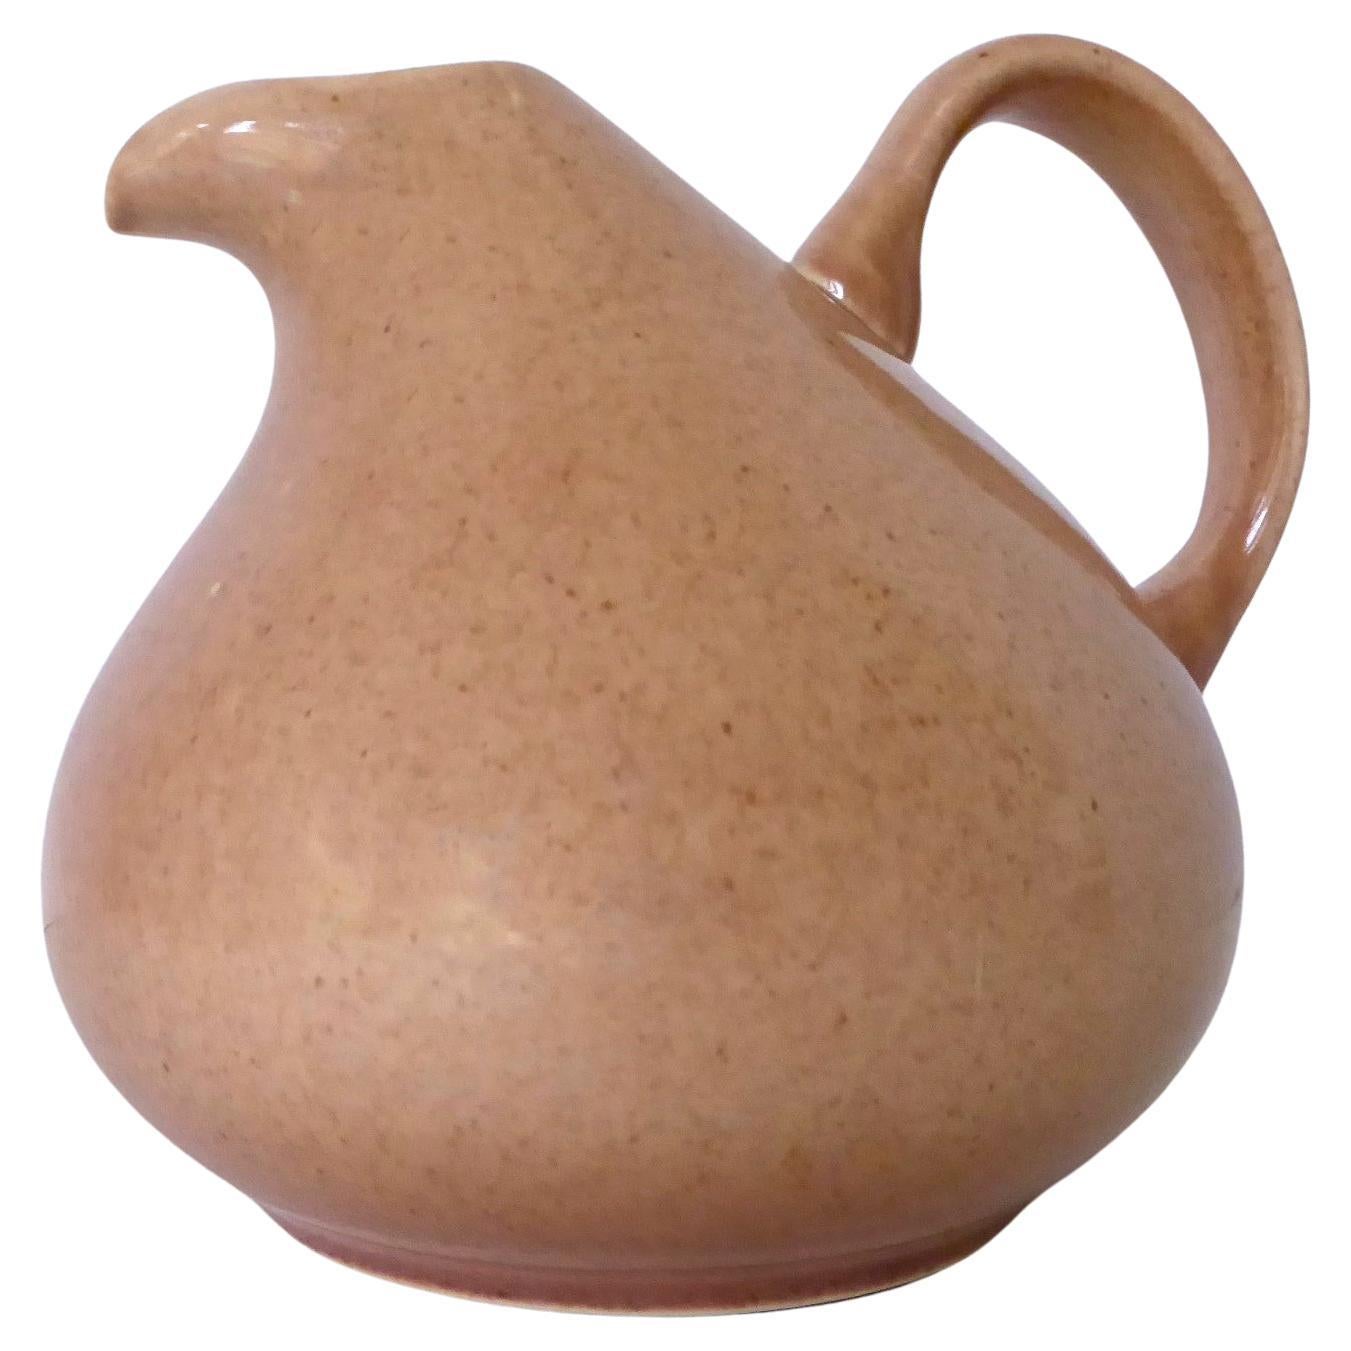 Mid Century Russel Wright (1904-1976) Coral American Modern carafe / jug / pitcher designed in 1937 and originally produced of sturdy earthenware by Steubenville Pottery (later made by Bauer Pottery of California). Popular collection of modern